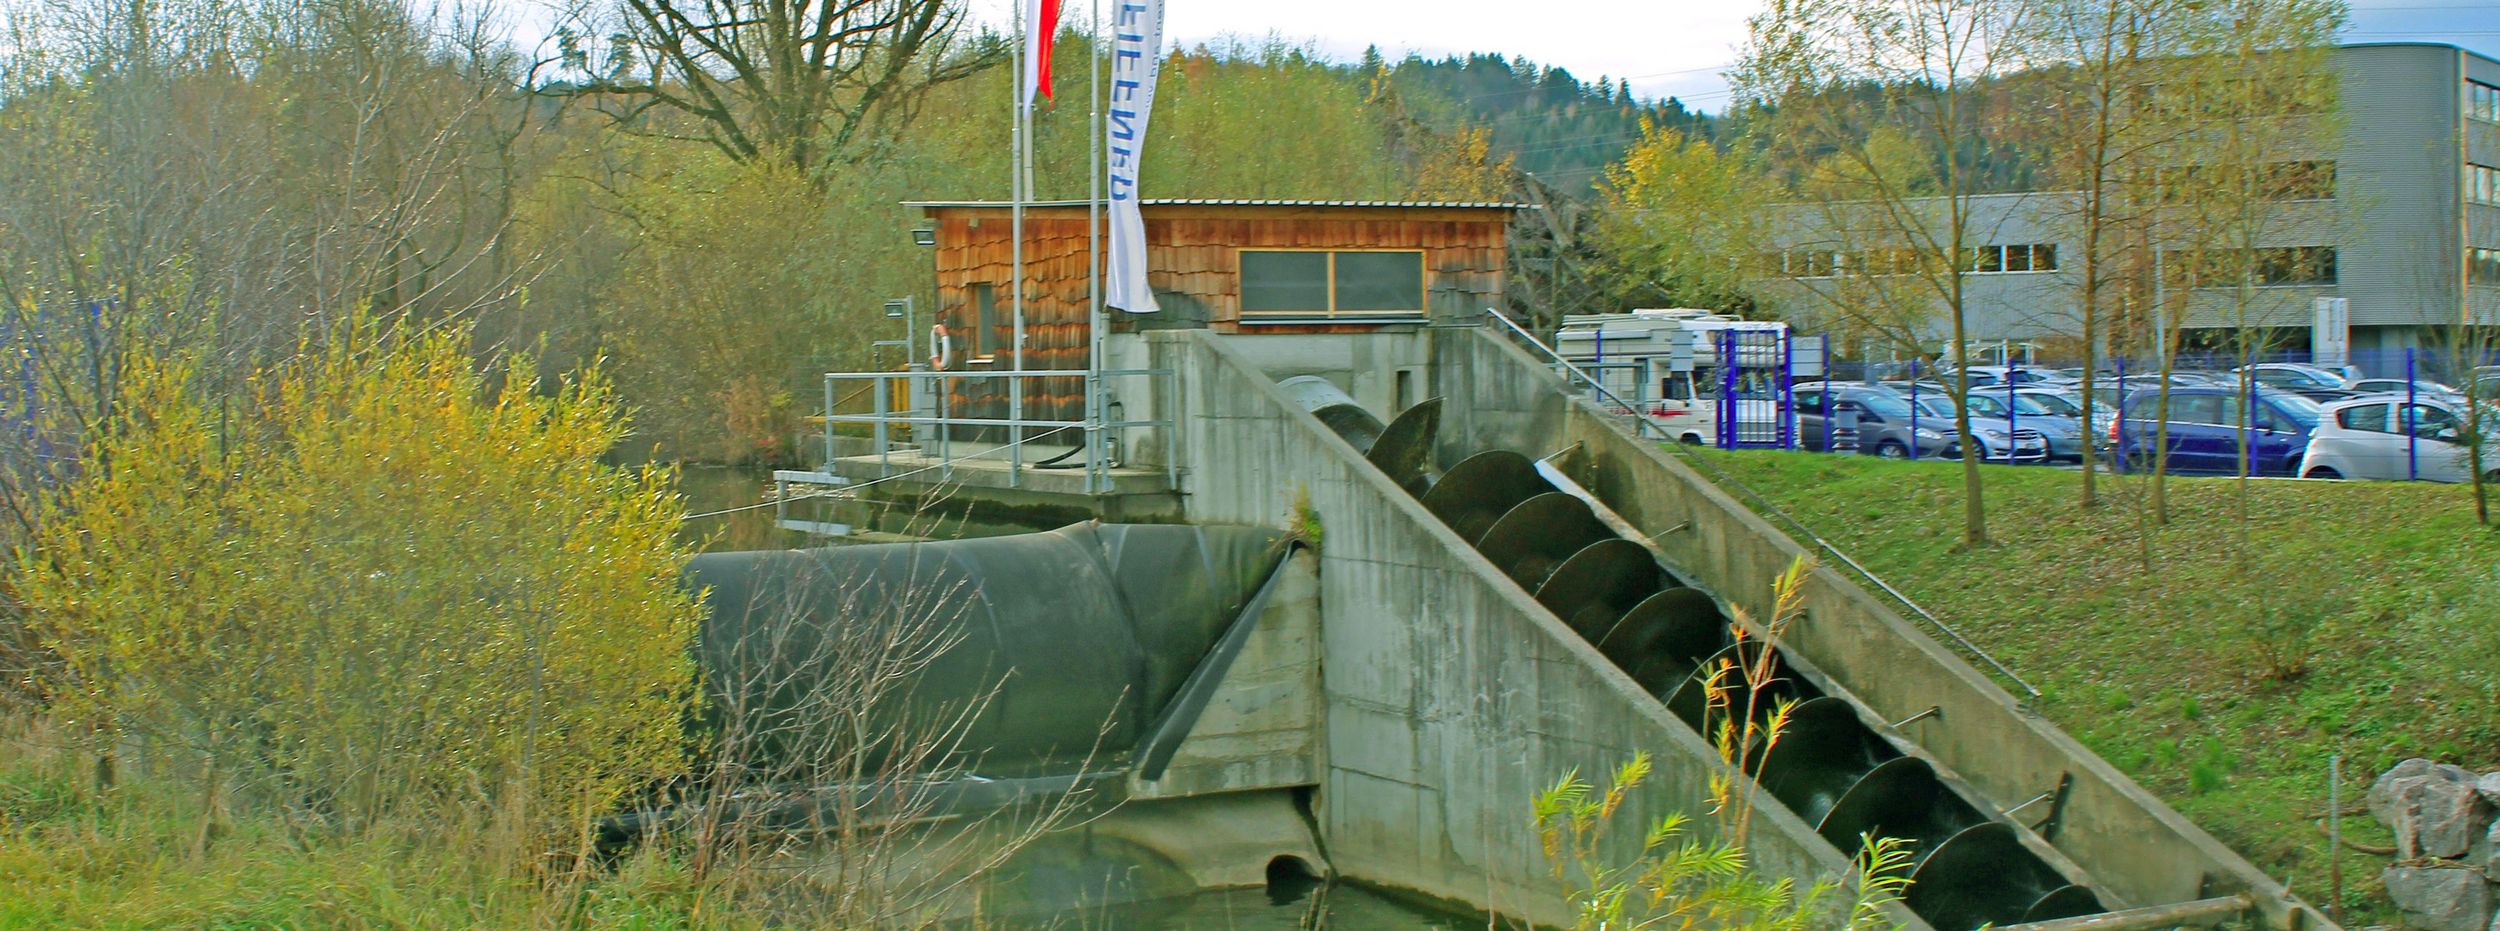 Pfiffner Hydropower Station Hirschthal, the most productive form of solar energy in Switzerland